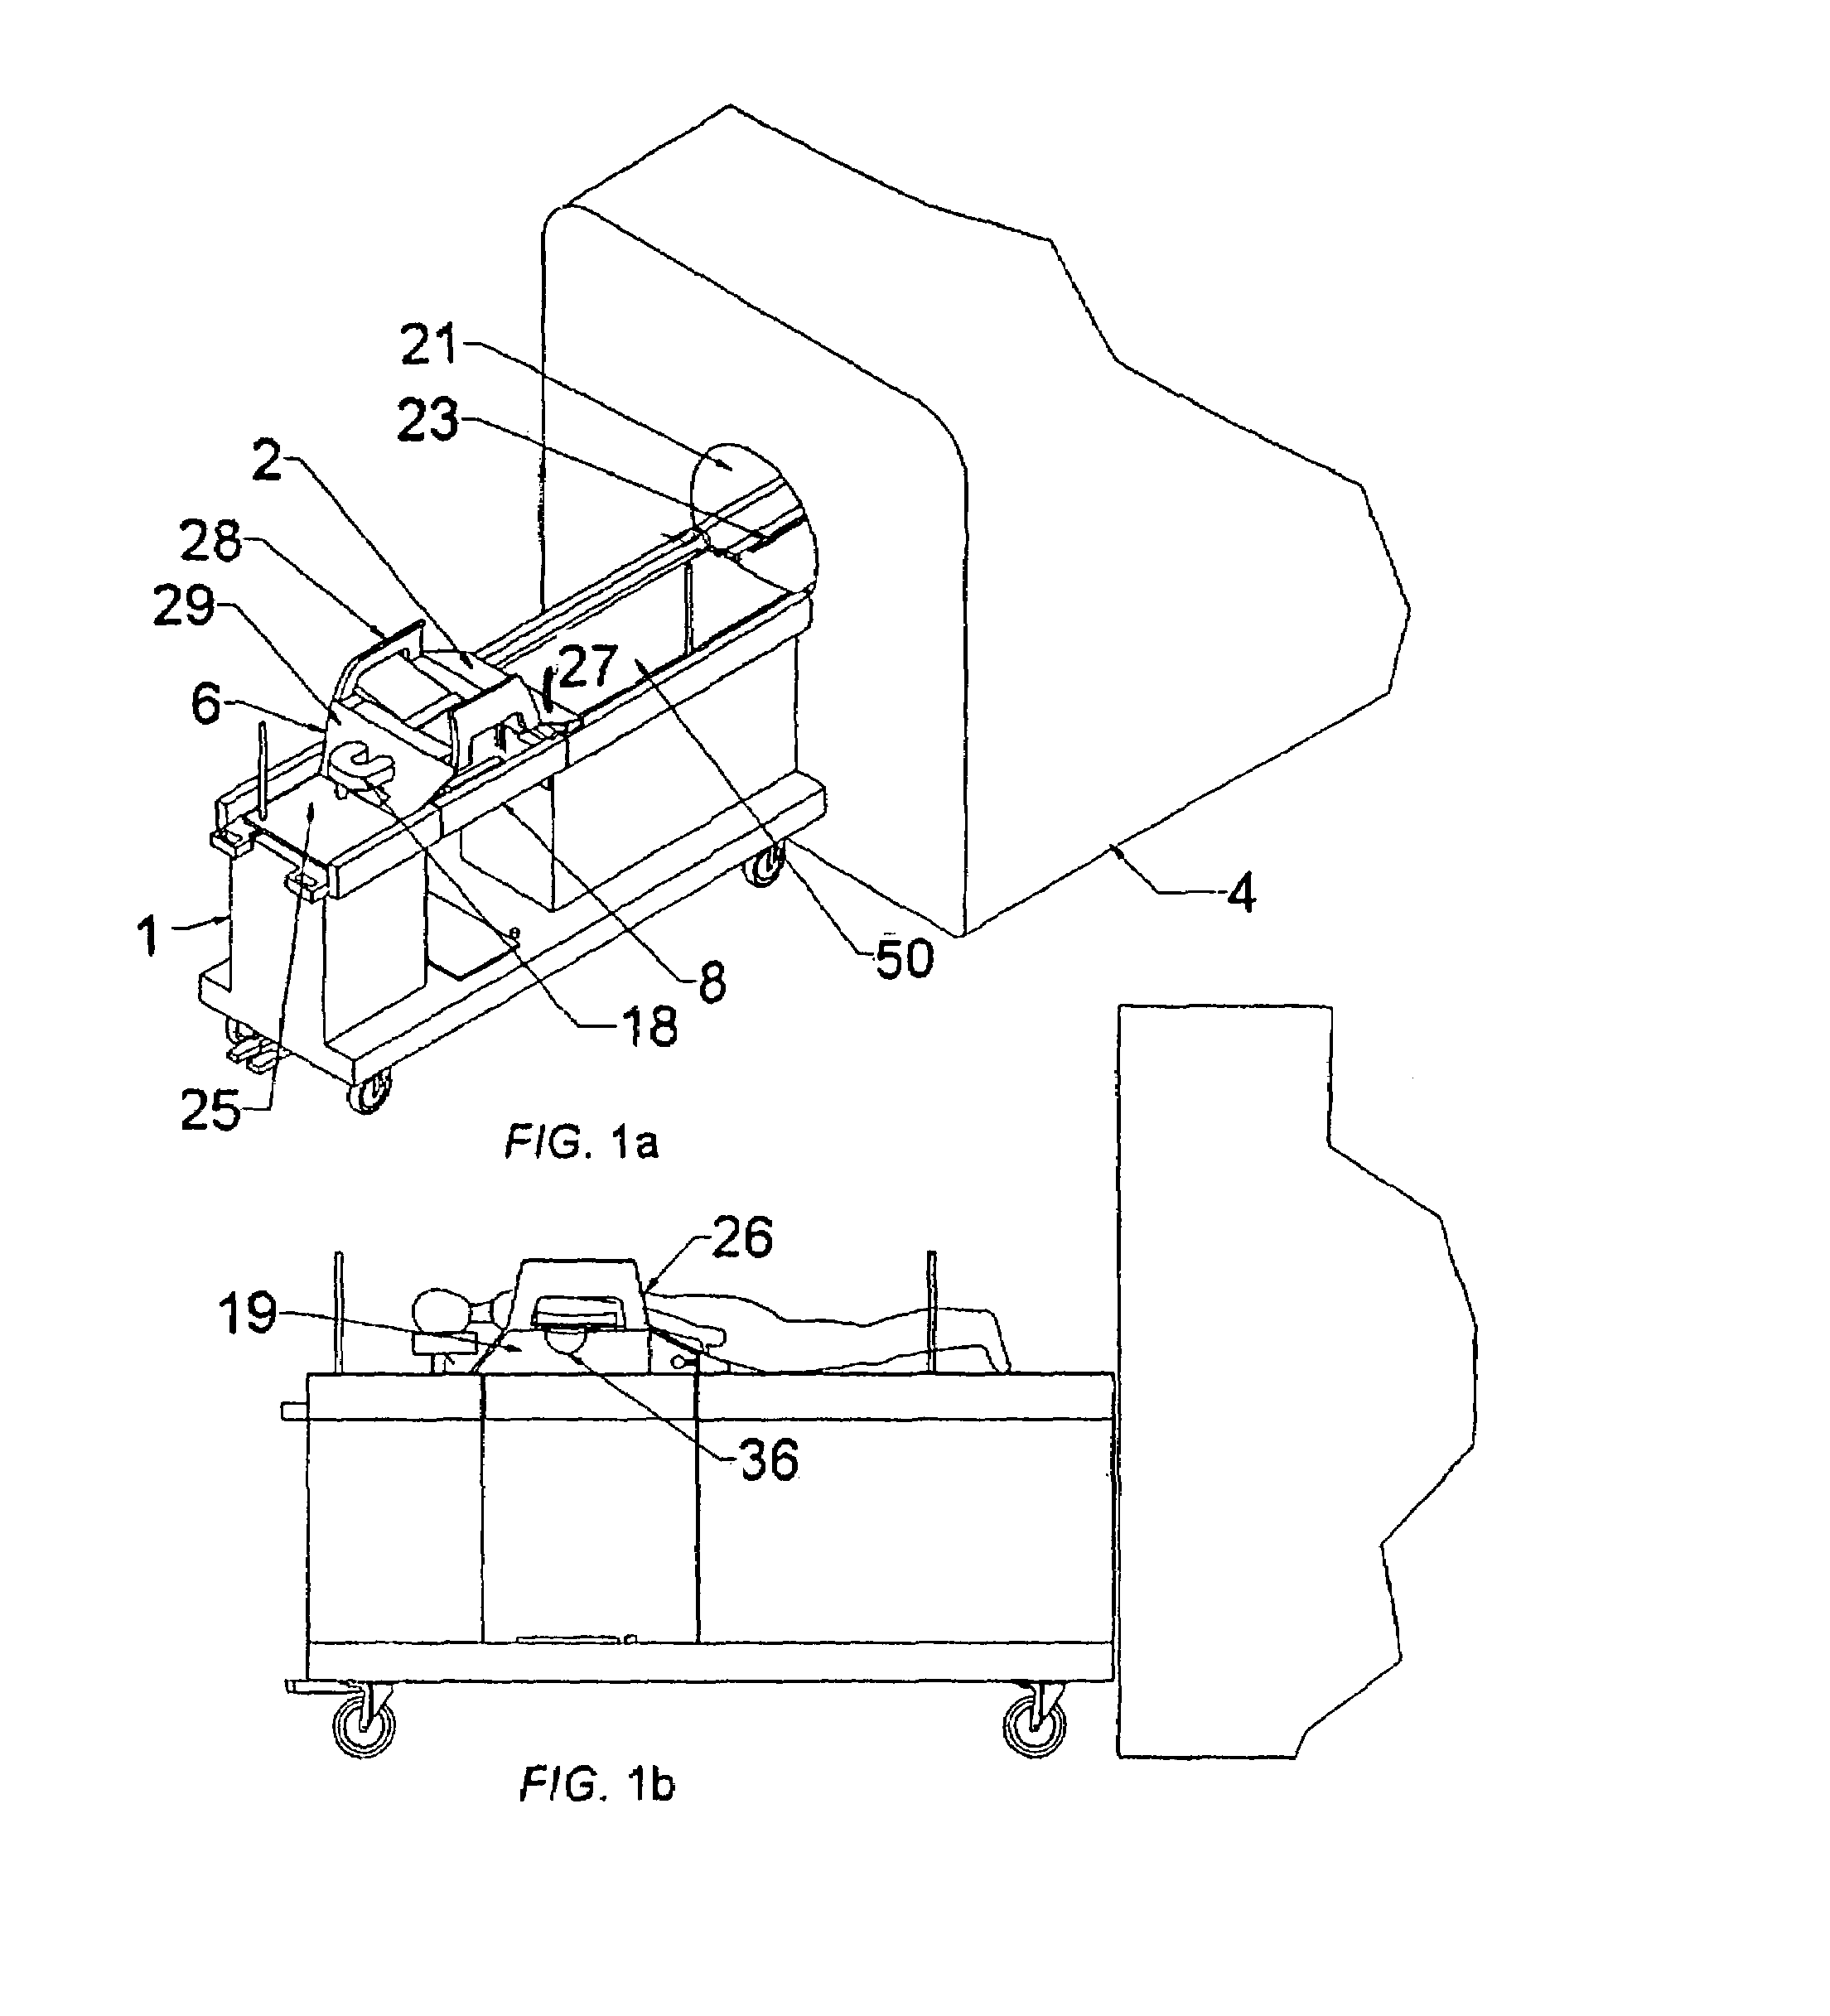 Hybrid imaging method to monitor medical device delivery and patient support for use in the method